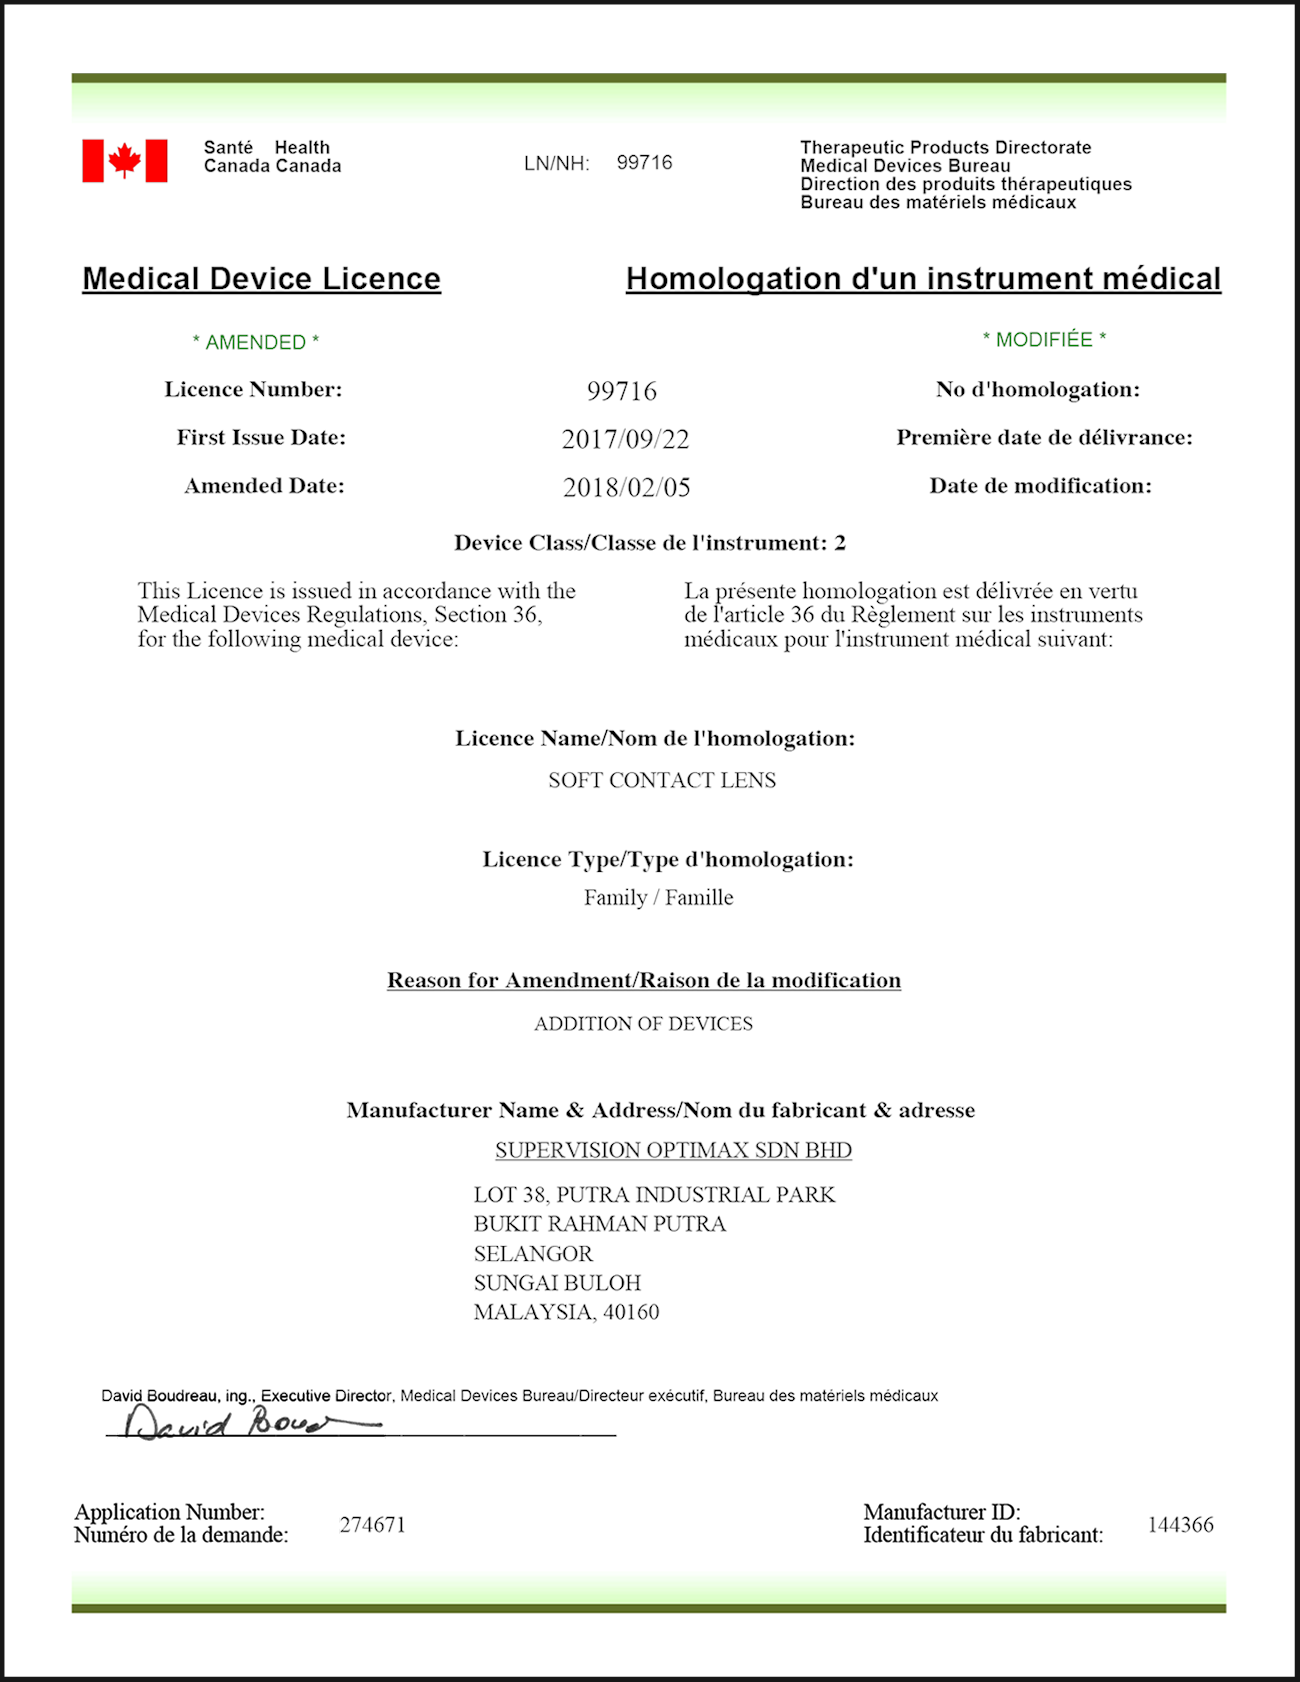 Supervision Optimax Contact Lens Health Canada Medical Device Licence